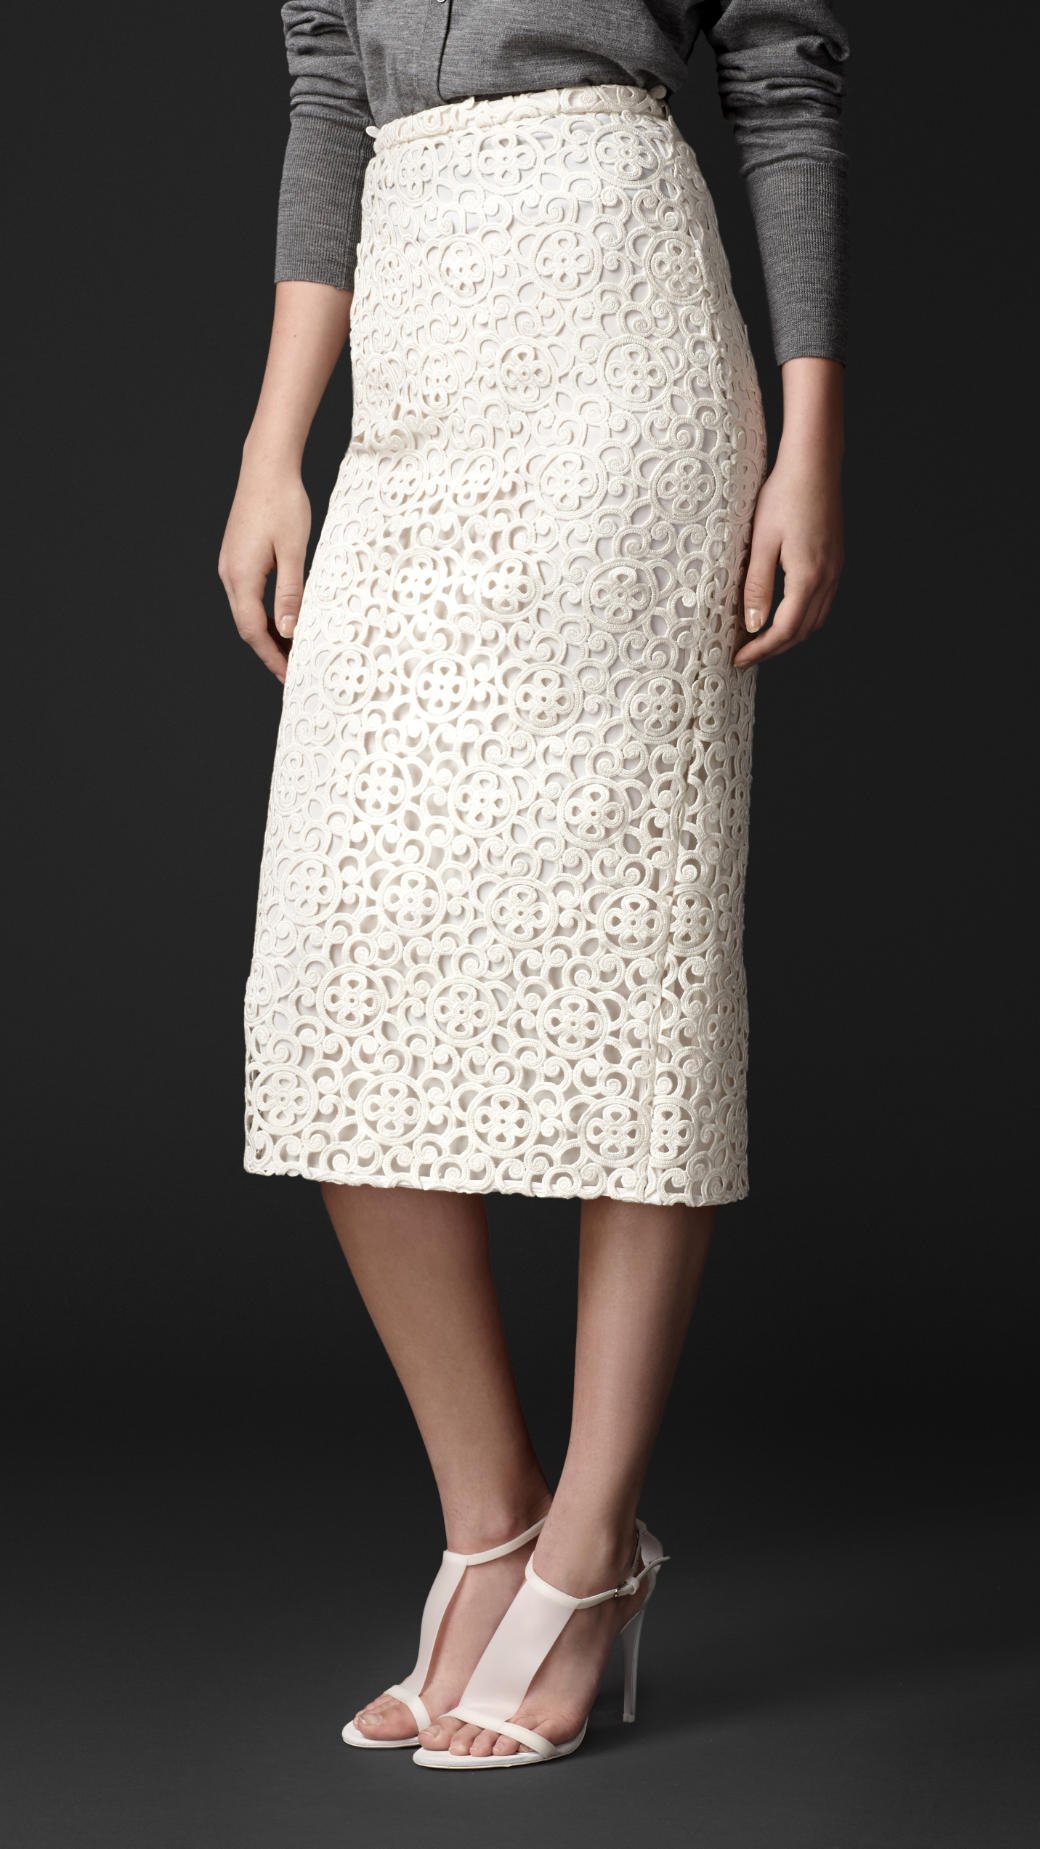 Lyst - Burberry Macramé Lace Pencil Skirt in White